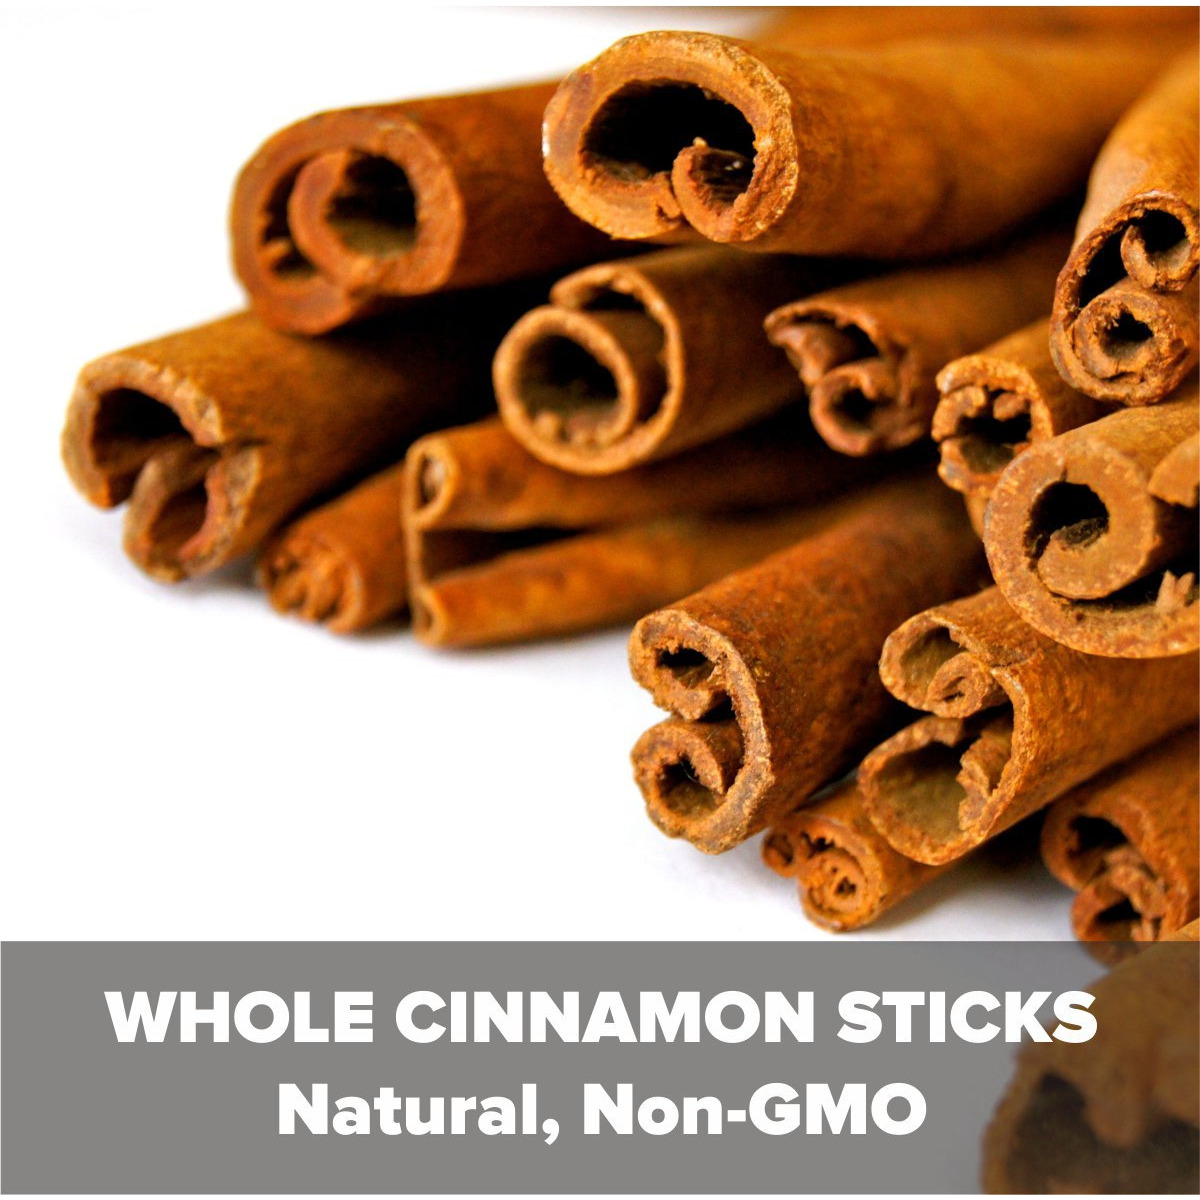 EL The Cook Whole Cinnamon Sticks | Aromatic Indian Spice | Natural, Vegan, Gluten Free, NON-GMO, Resealable Bag | Ideal for Indian, Asian Cooking, Tea, Coffee, Baking & Mulling Wine | 3.5oz (100gm) (Flavor: Cinnamon Sticks)